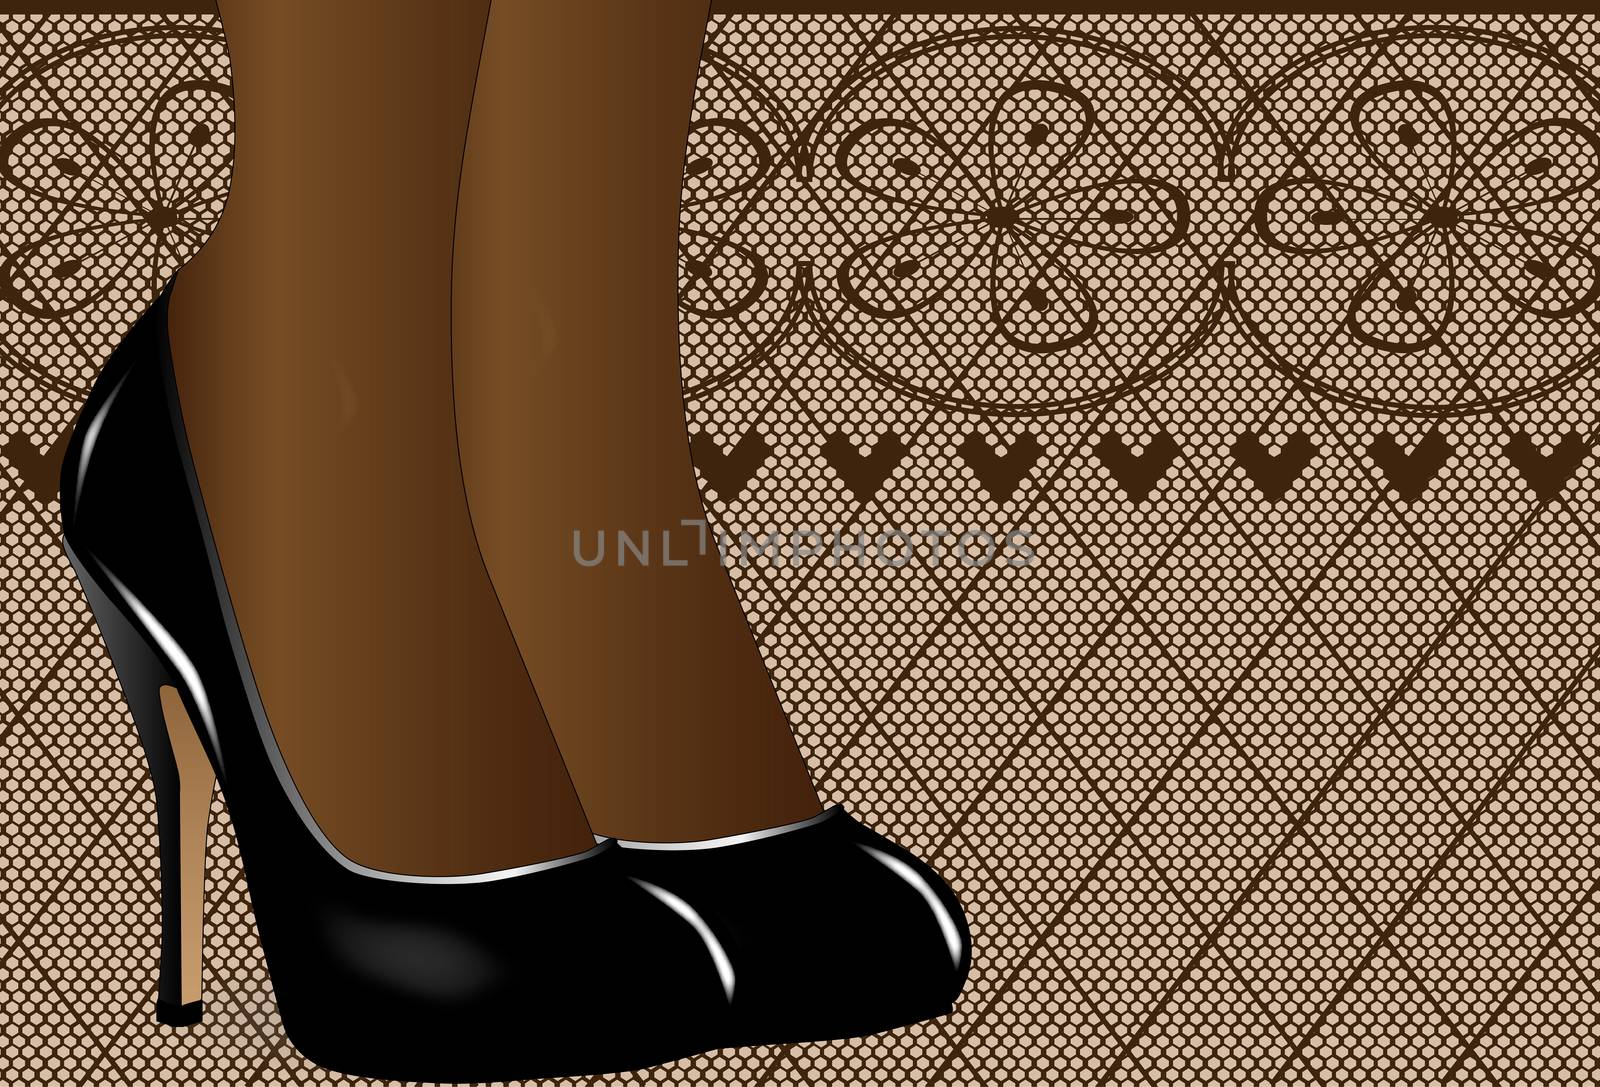 A pair of ladies legs in steletto heal shoes against a stocking type background